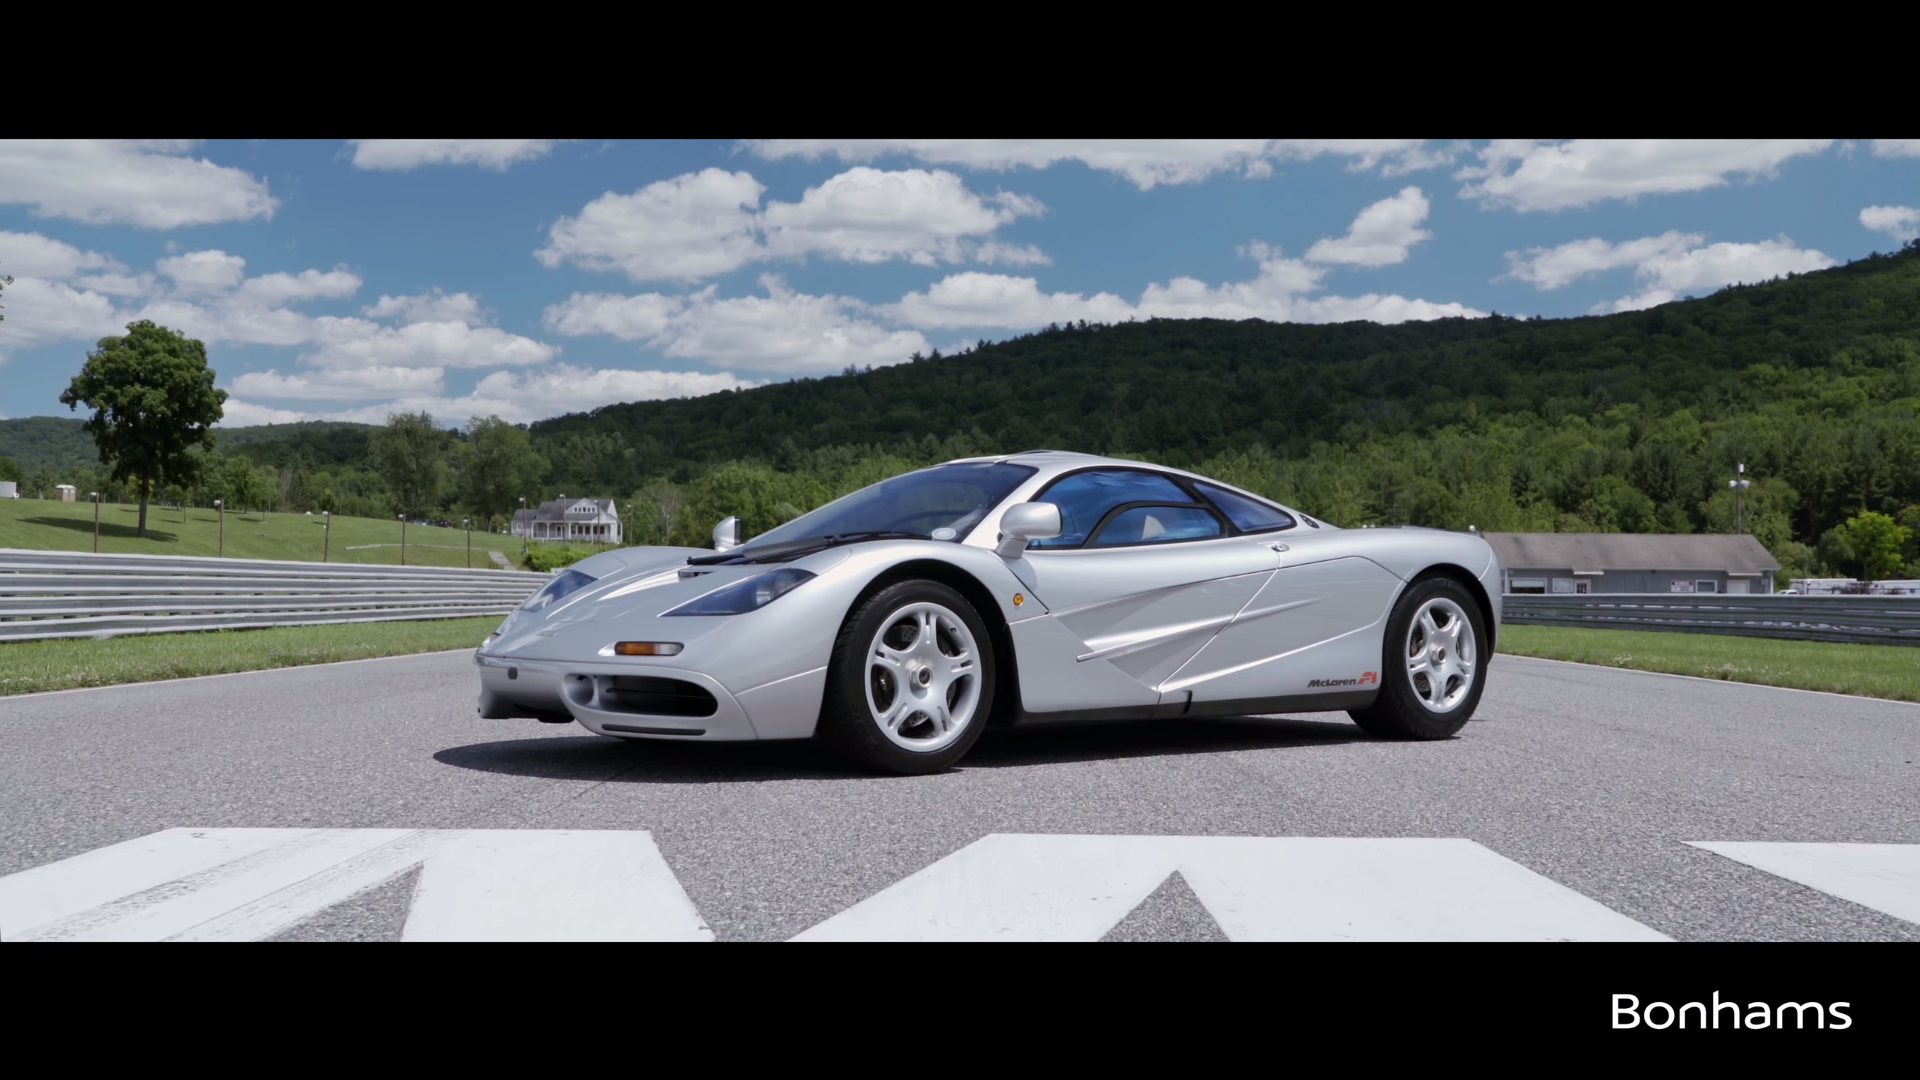 The First McLaren F1 in the U.S. Goes Up for Auction in August